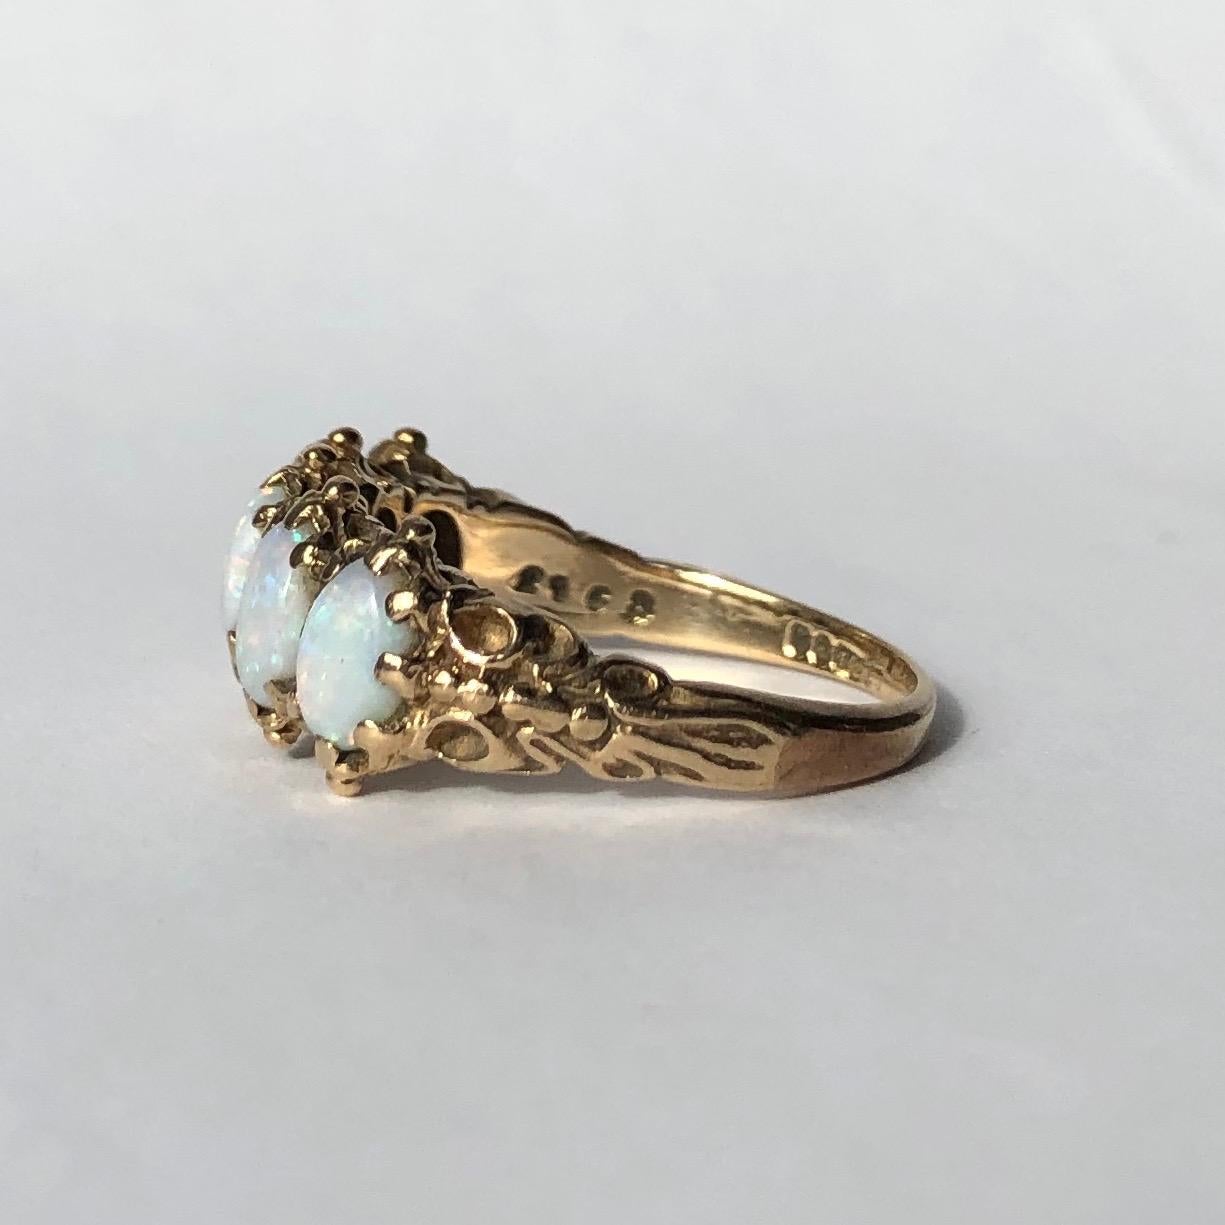 The style if this five stone ring has an almost Indian feel to it. The bright yellow 9ct gold next to the pale shimmering opals is absolutely stunning. The edges of the band has tiny orb detail and the shoulders have gorgeous  detail. Made in